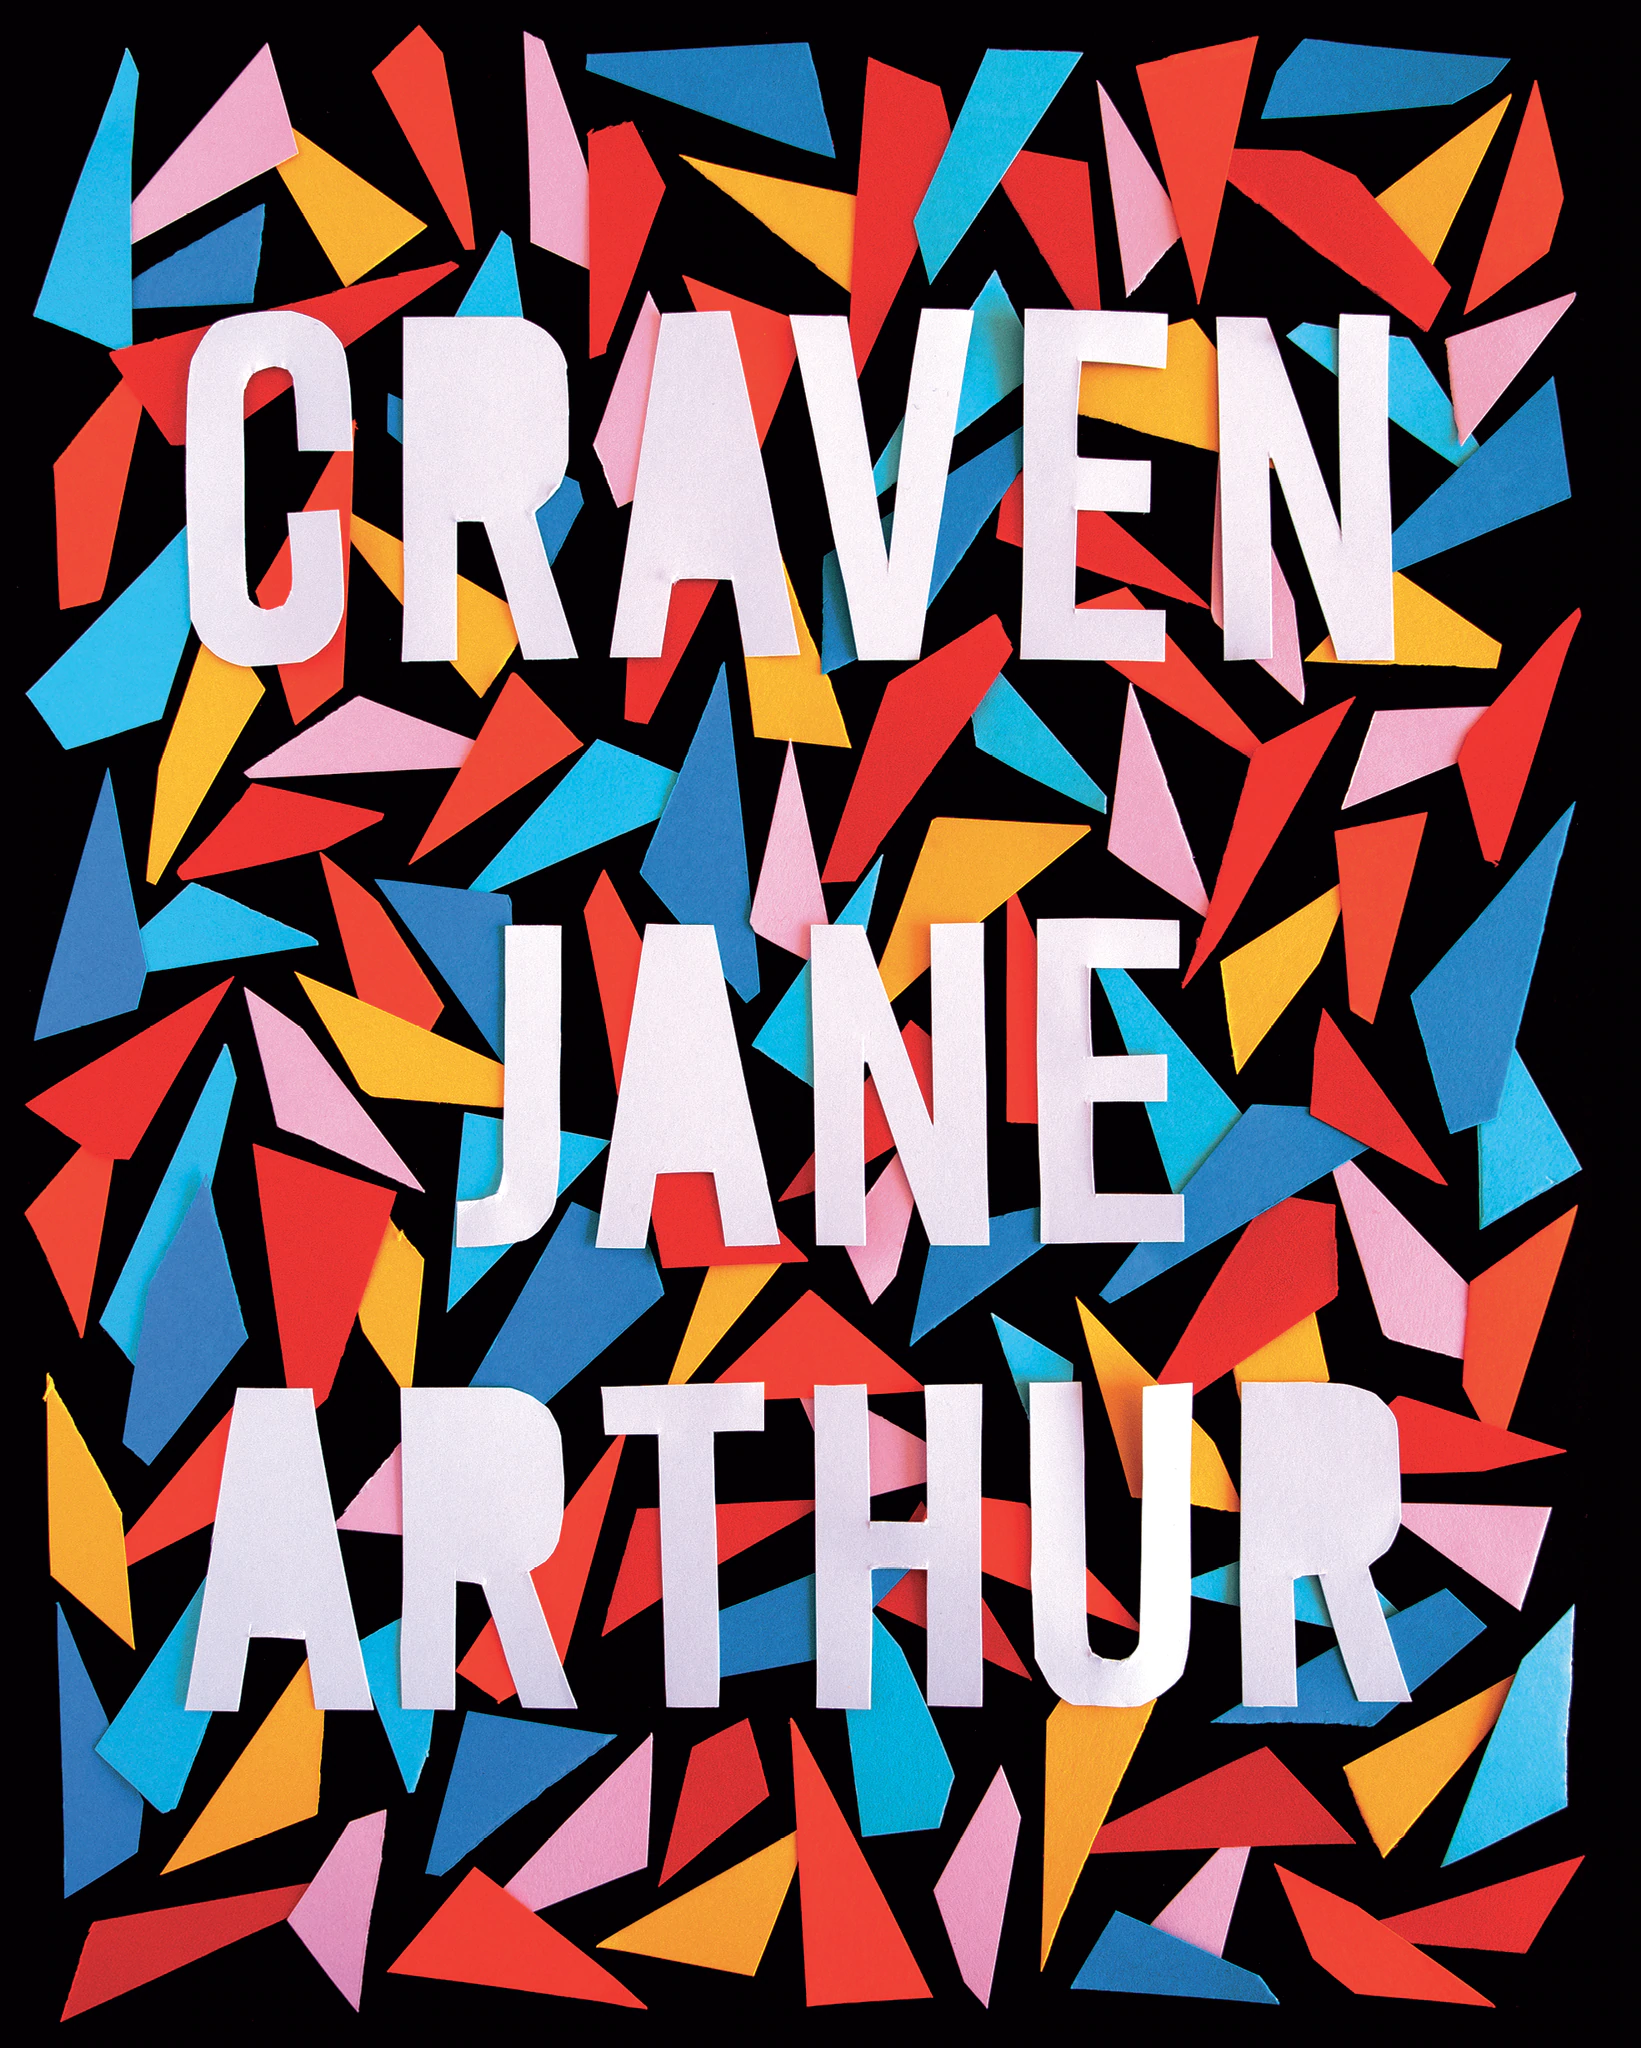 Launch | Craven by Jane Arthur | 6-7:30pm Tuesday 1st October